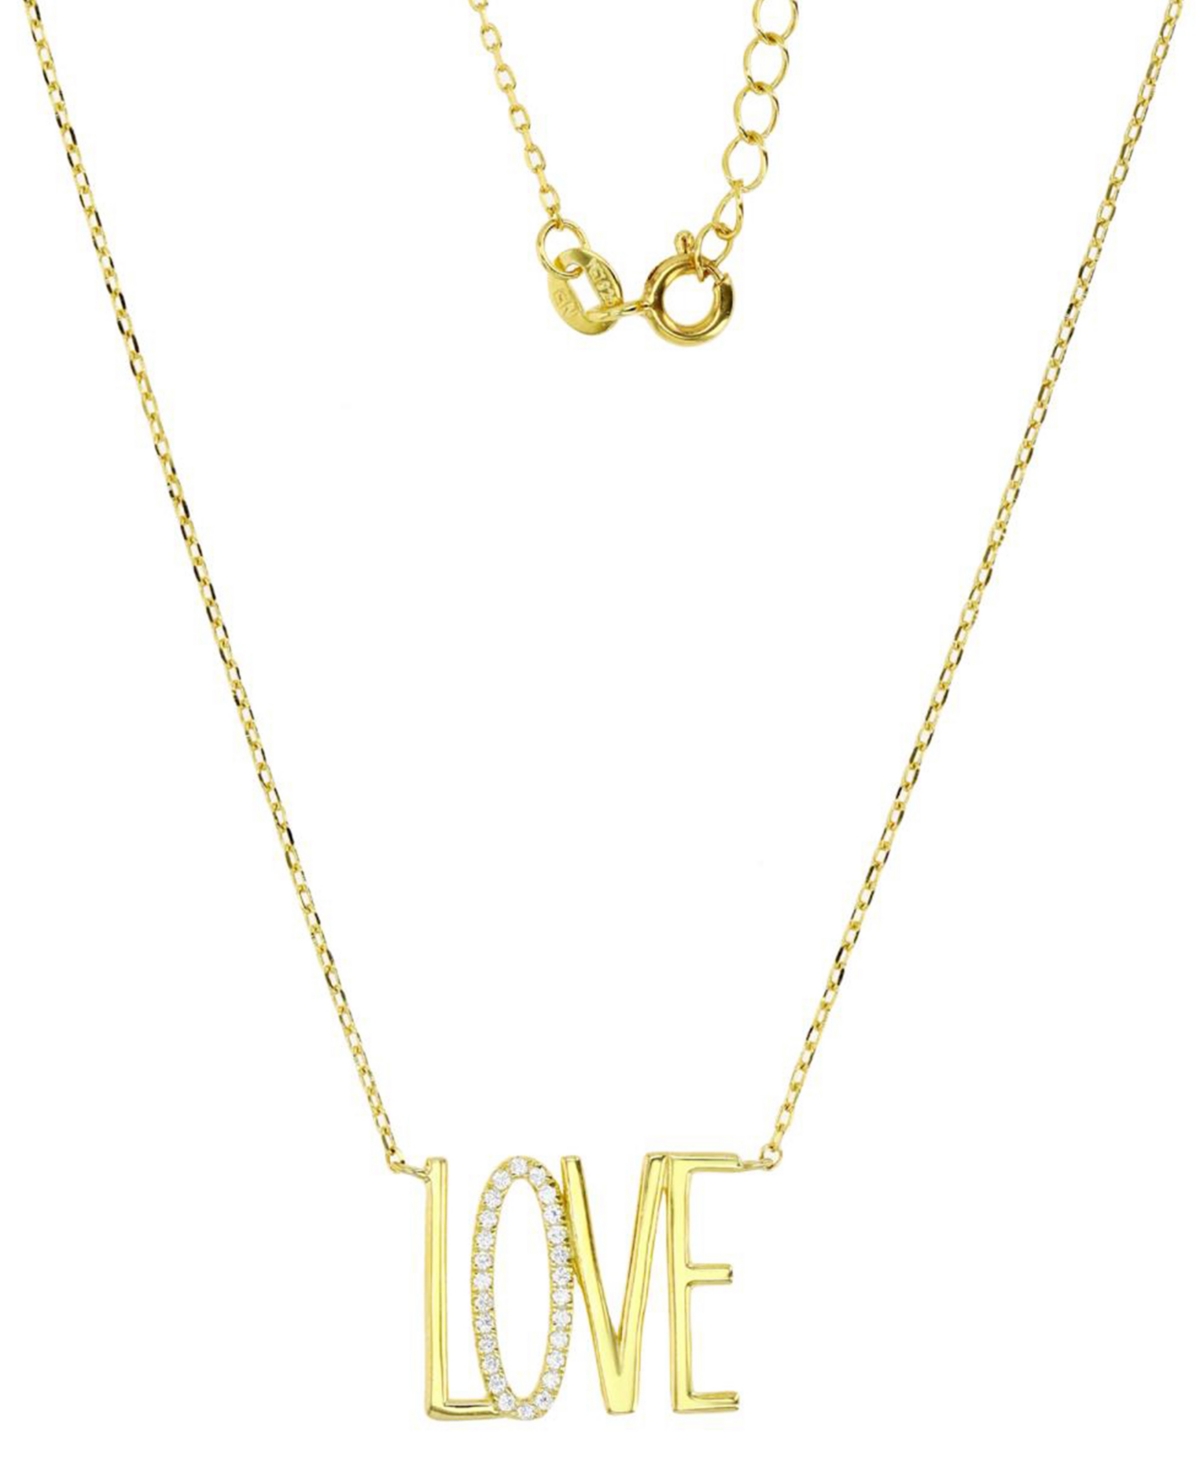 Cubic Zirconia Love Pendant Necklace in 14k Gold-Plated Sterling Silver, 16" + 2" extender - Gold